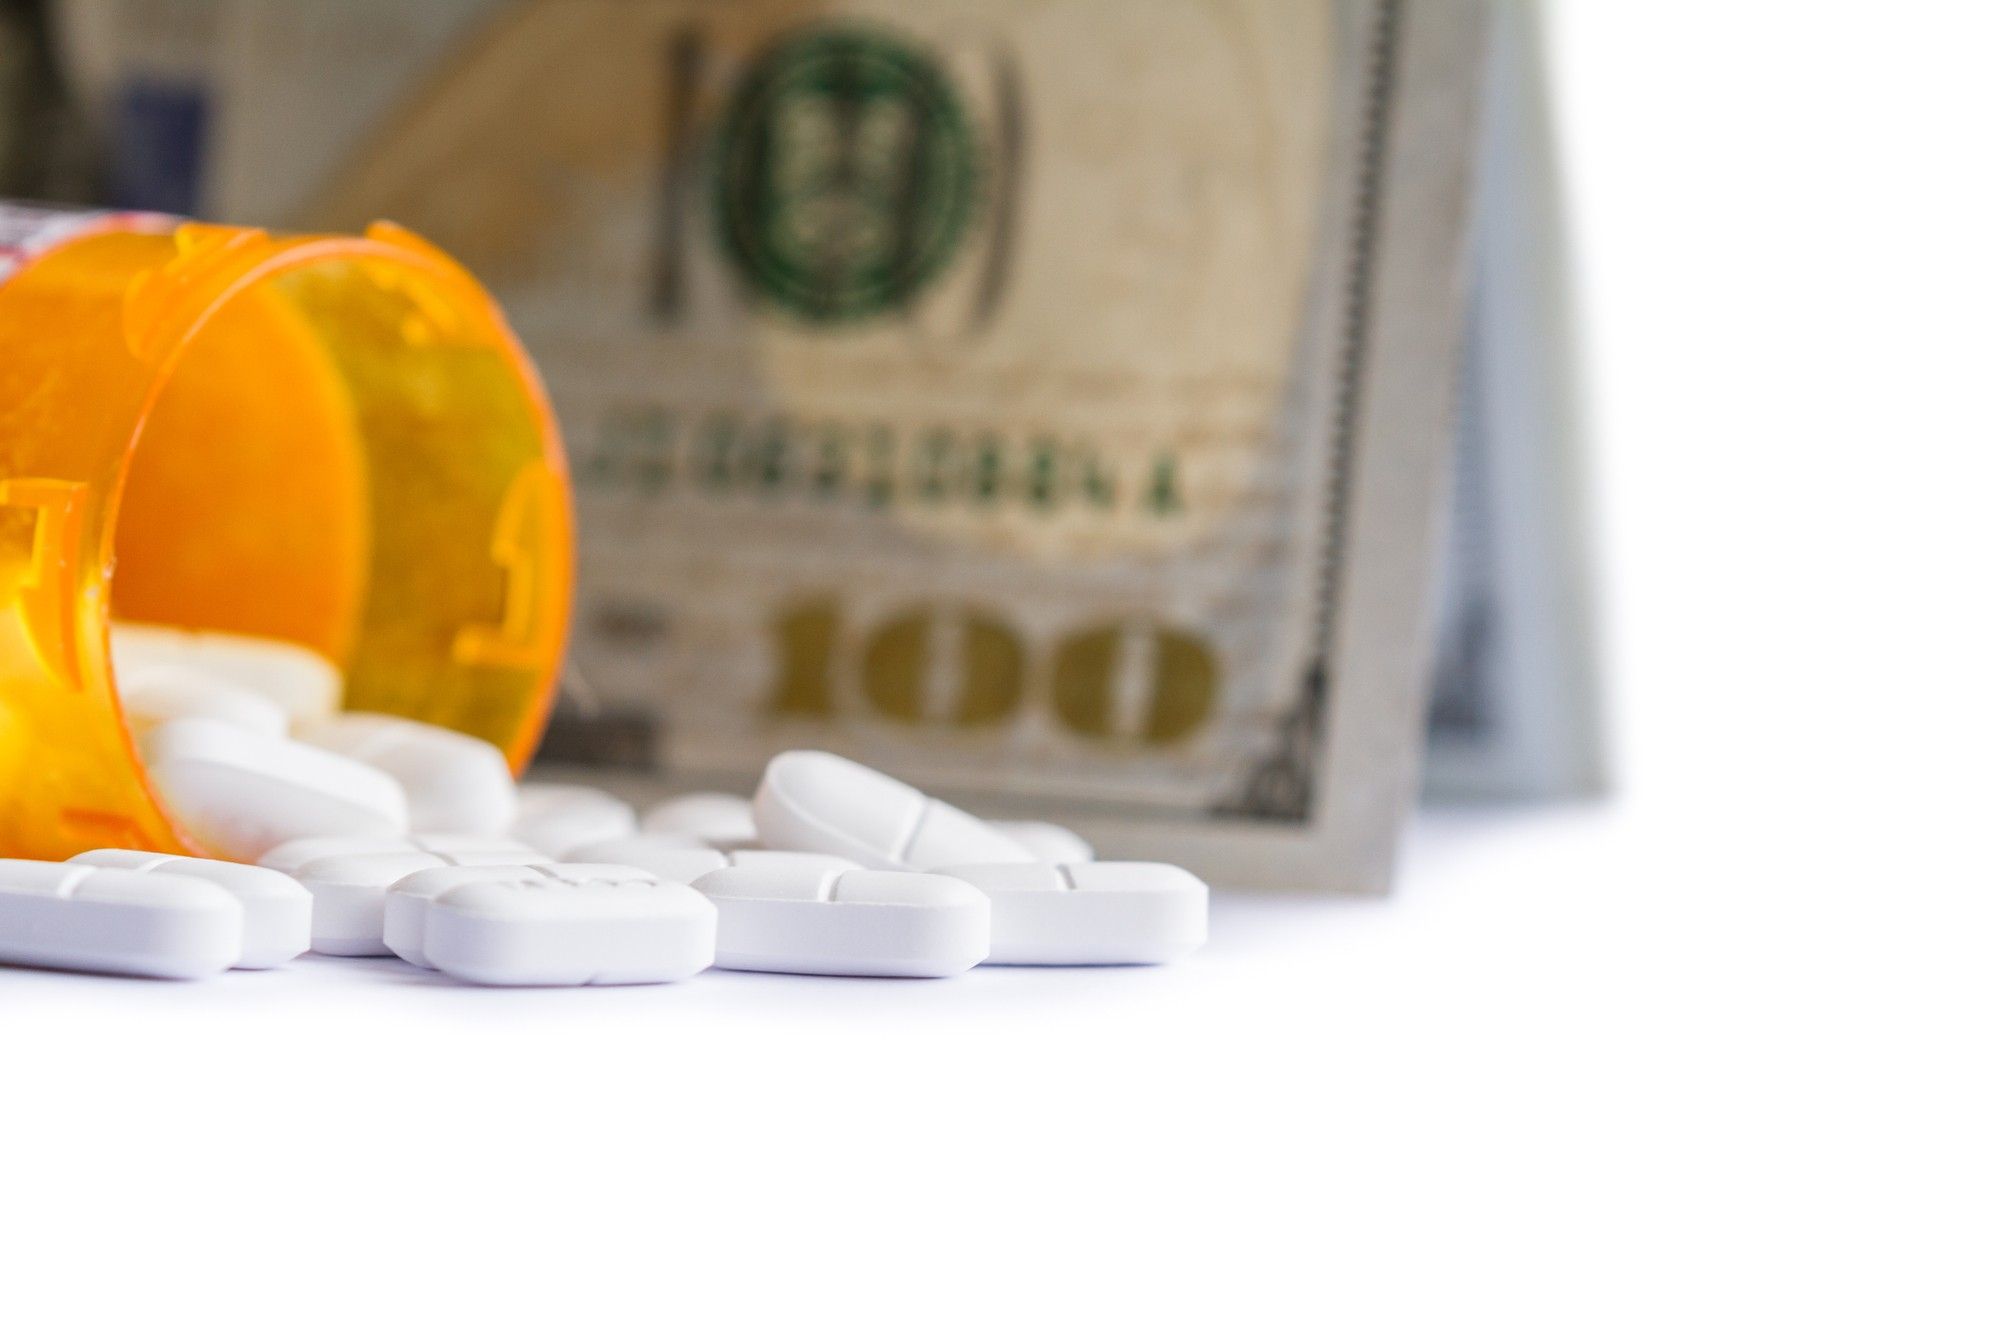 Insys Therapeutic founder to by $5 million in opioid settlement